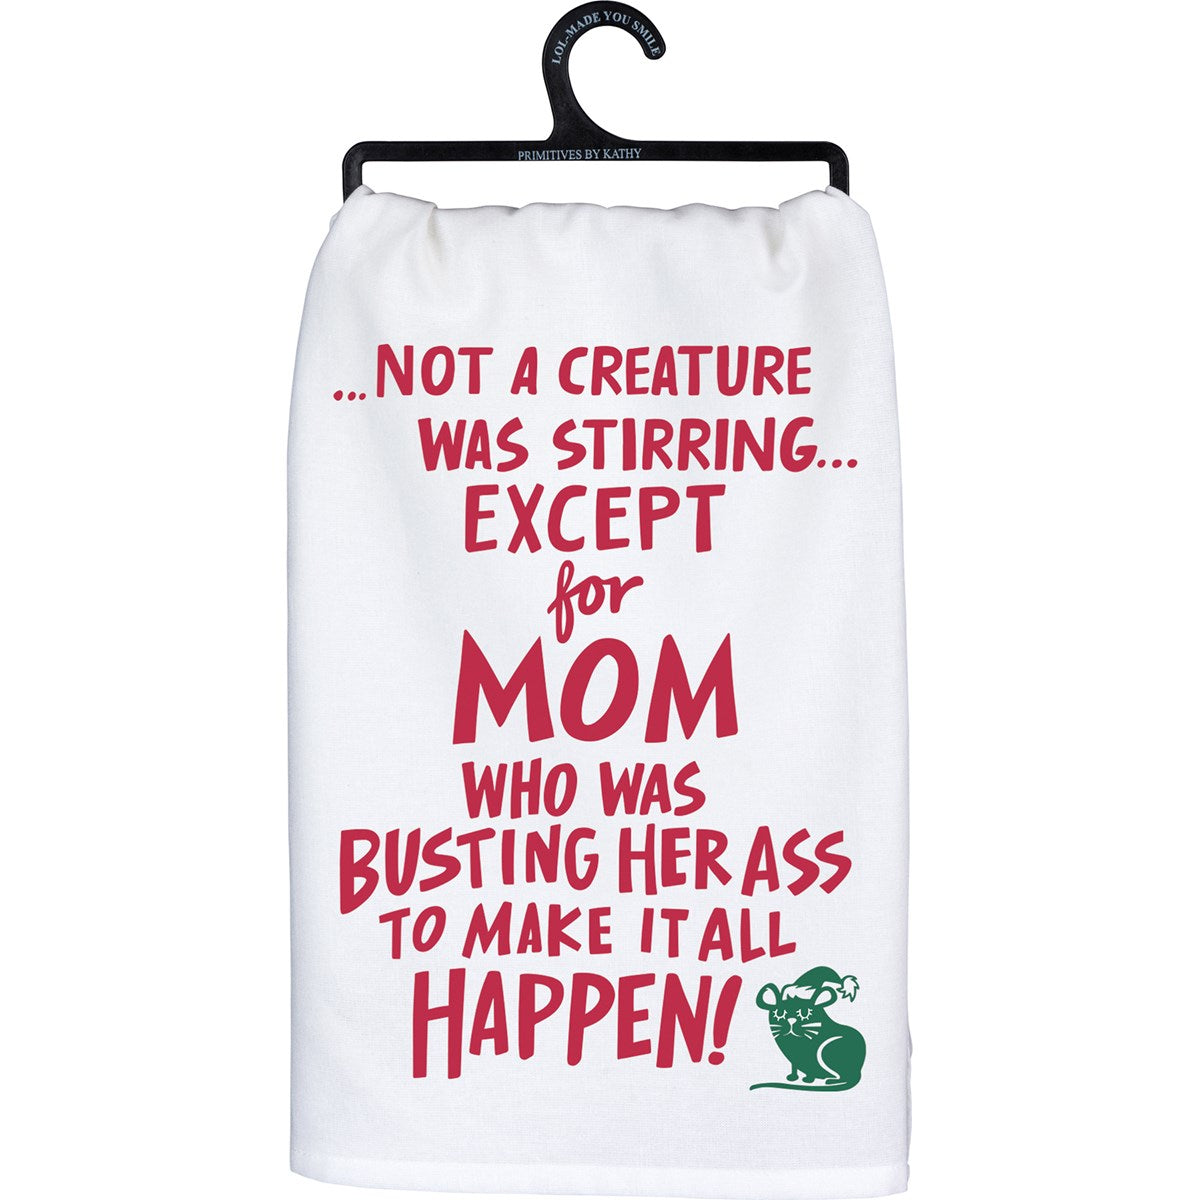 Kitchen Towels - Christmas assorted